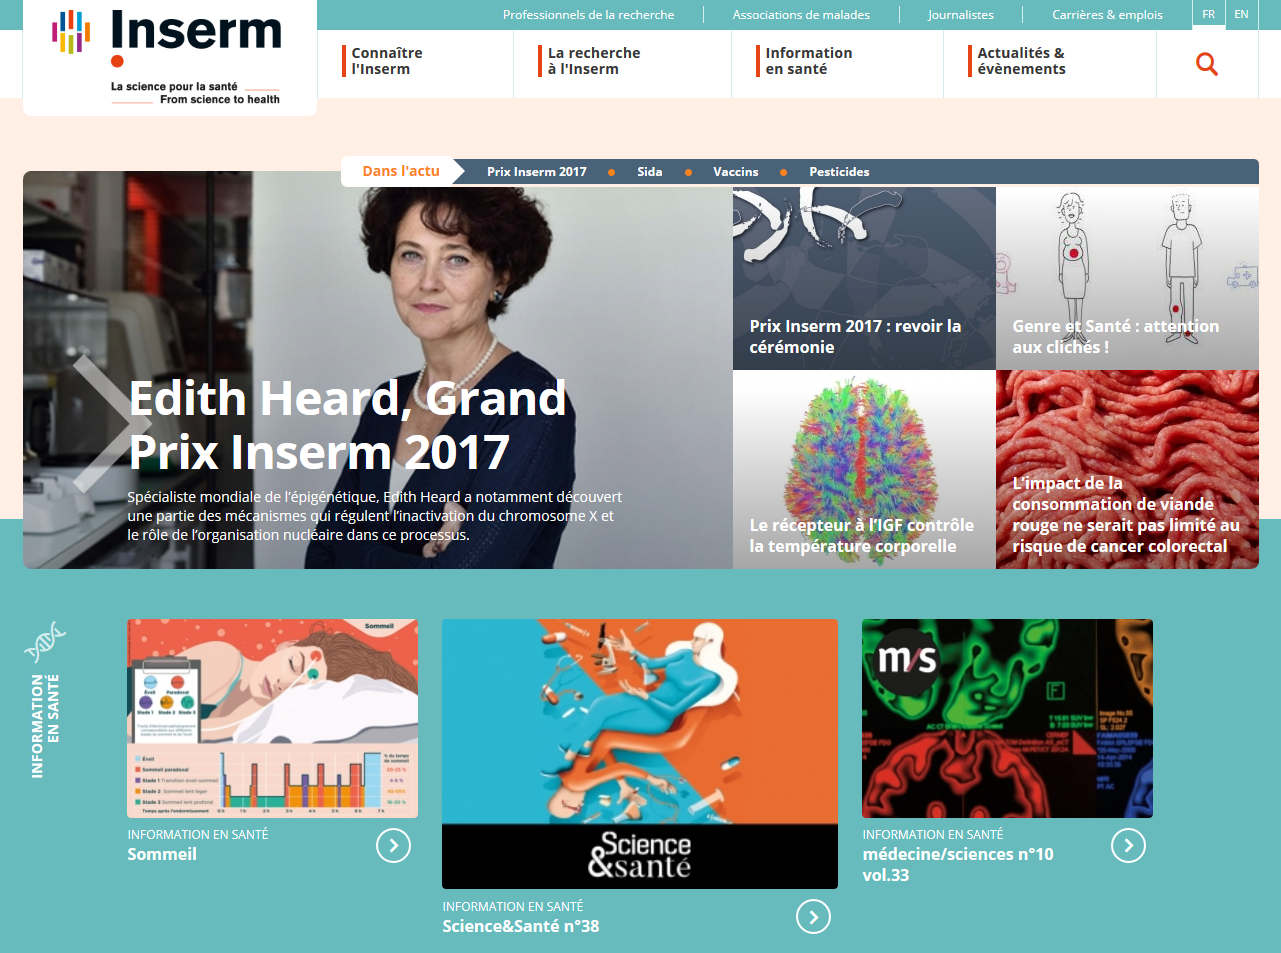 A New Look for www.inserm.fr